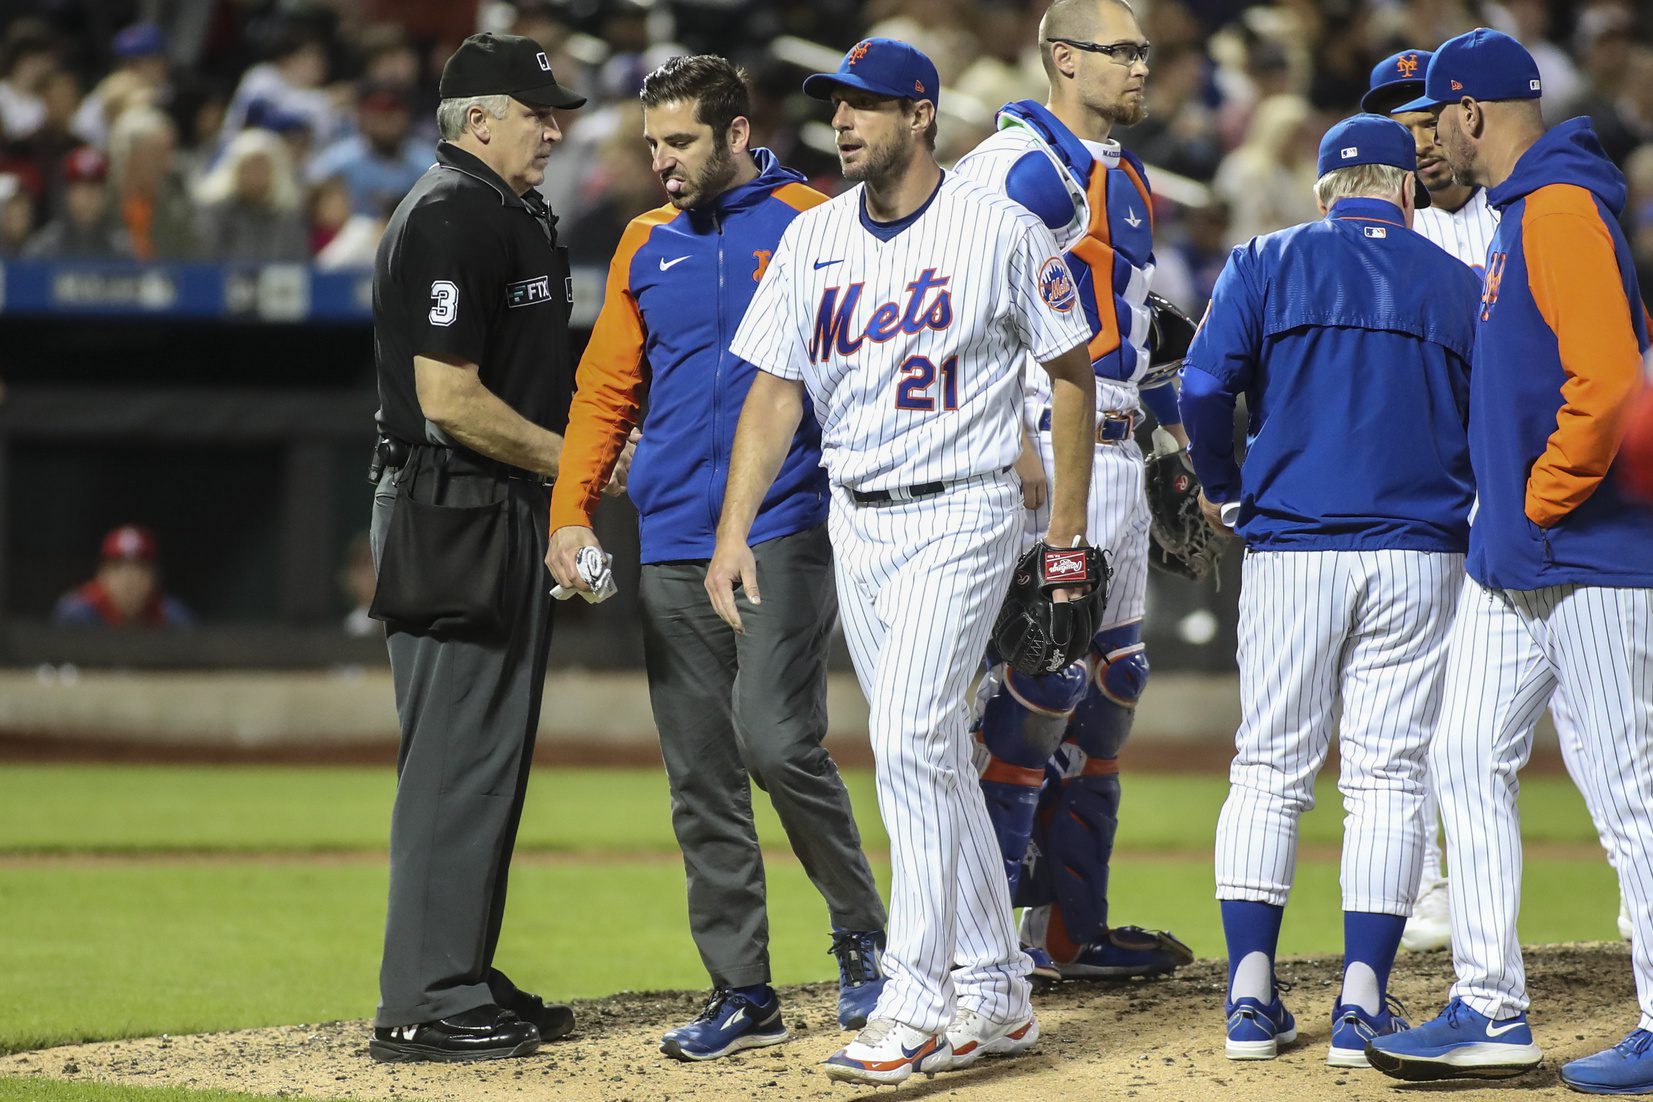 New York Mets starting pitcher Max Scherzer is taken out because of an injury